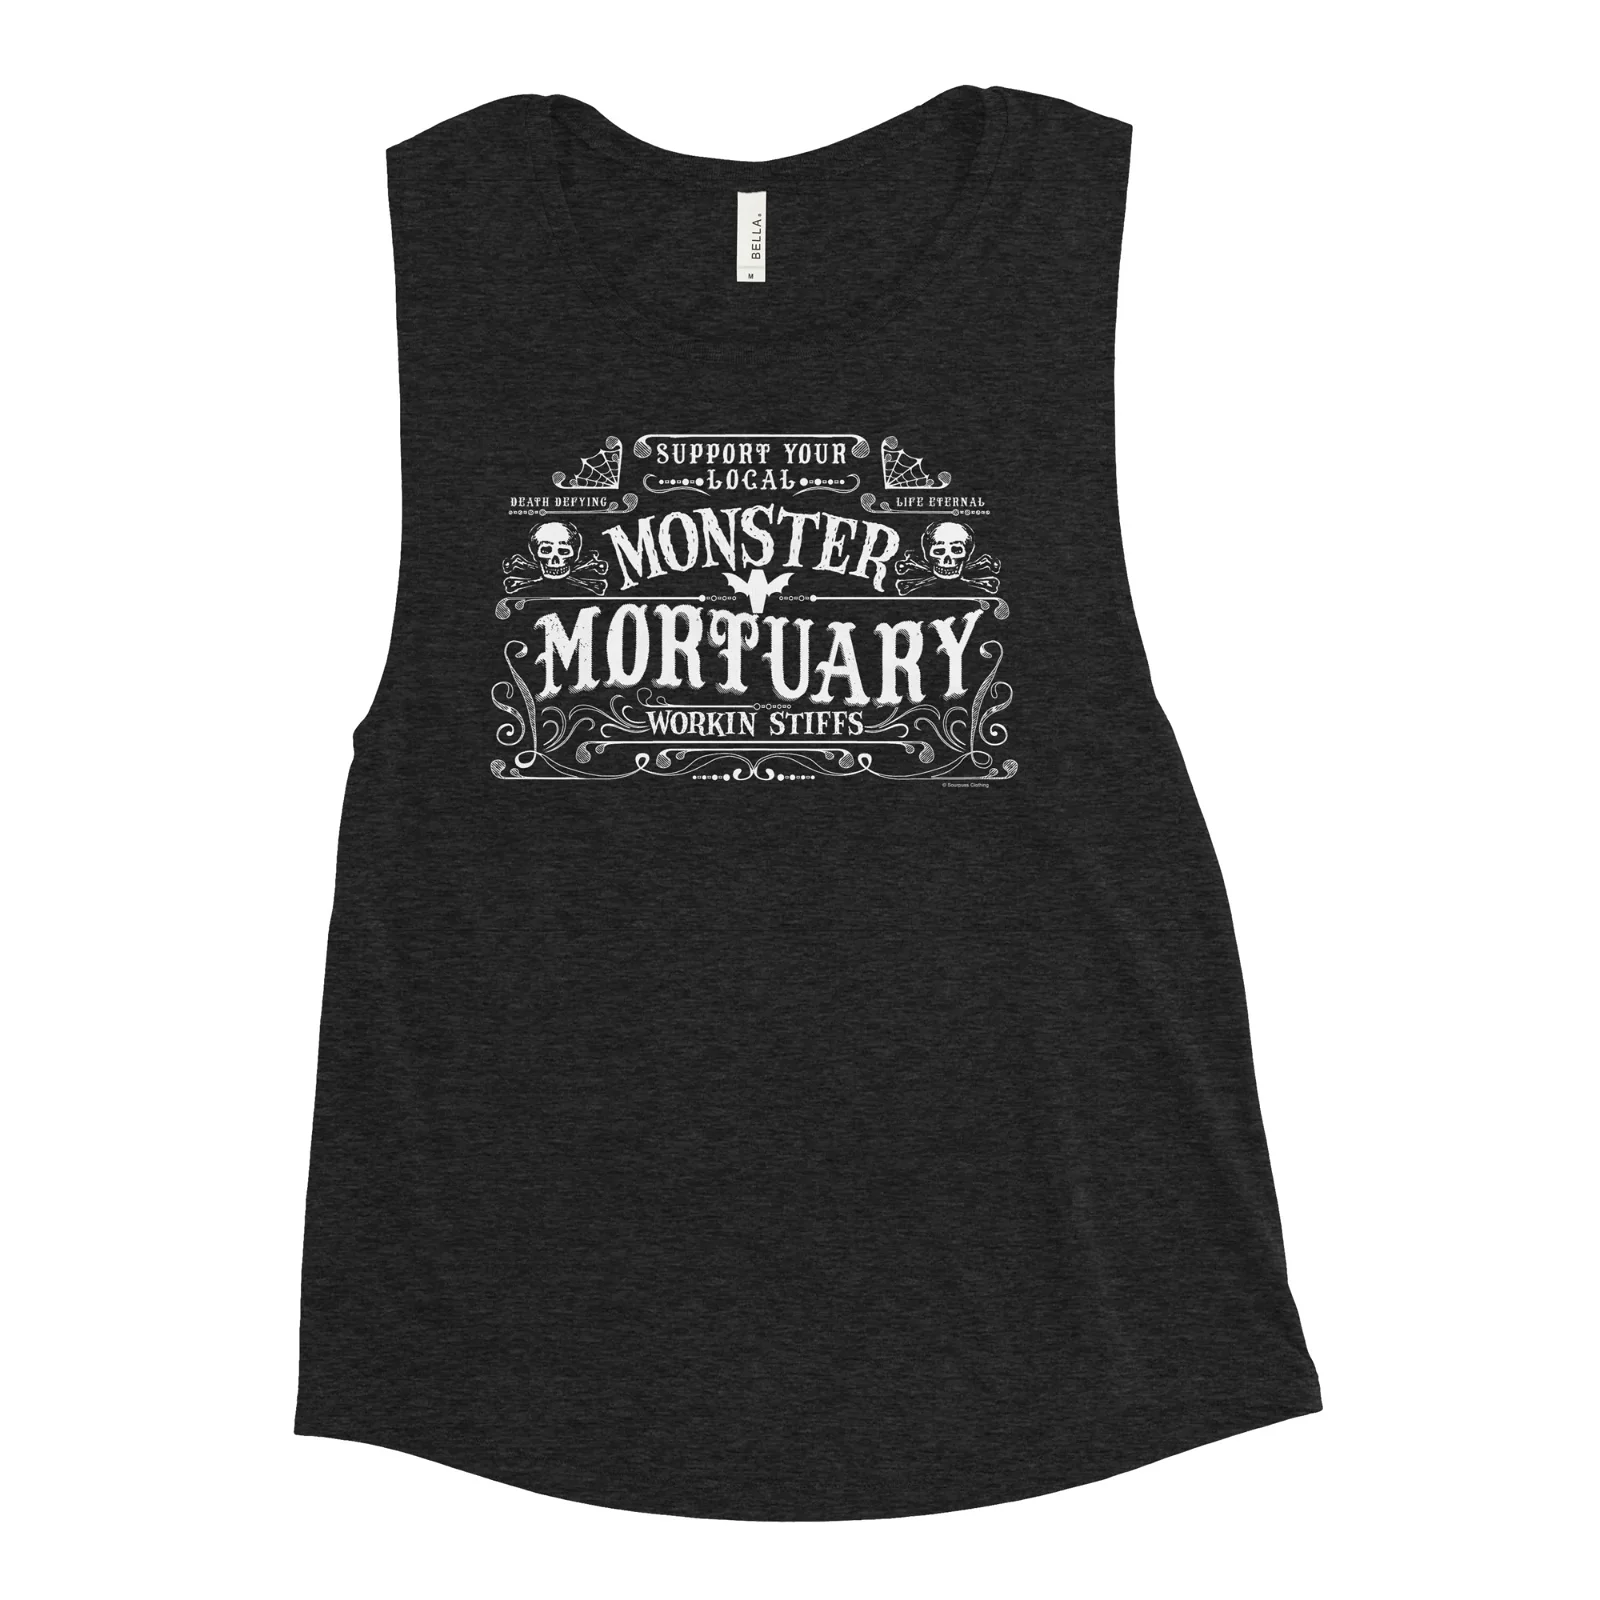 MONSTER MORTUARY MUSCLE TANK TOP